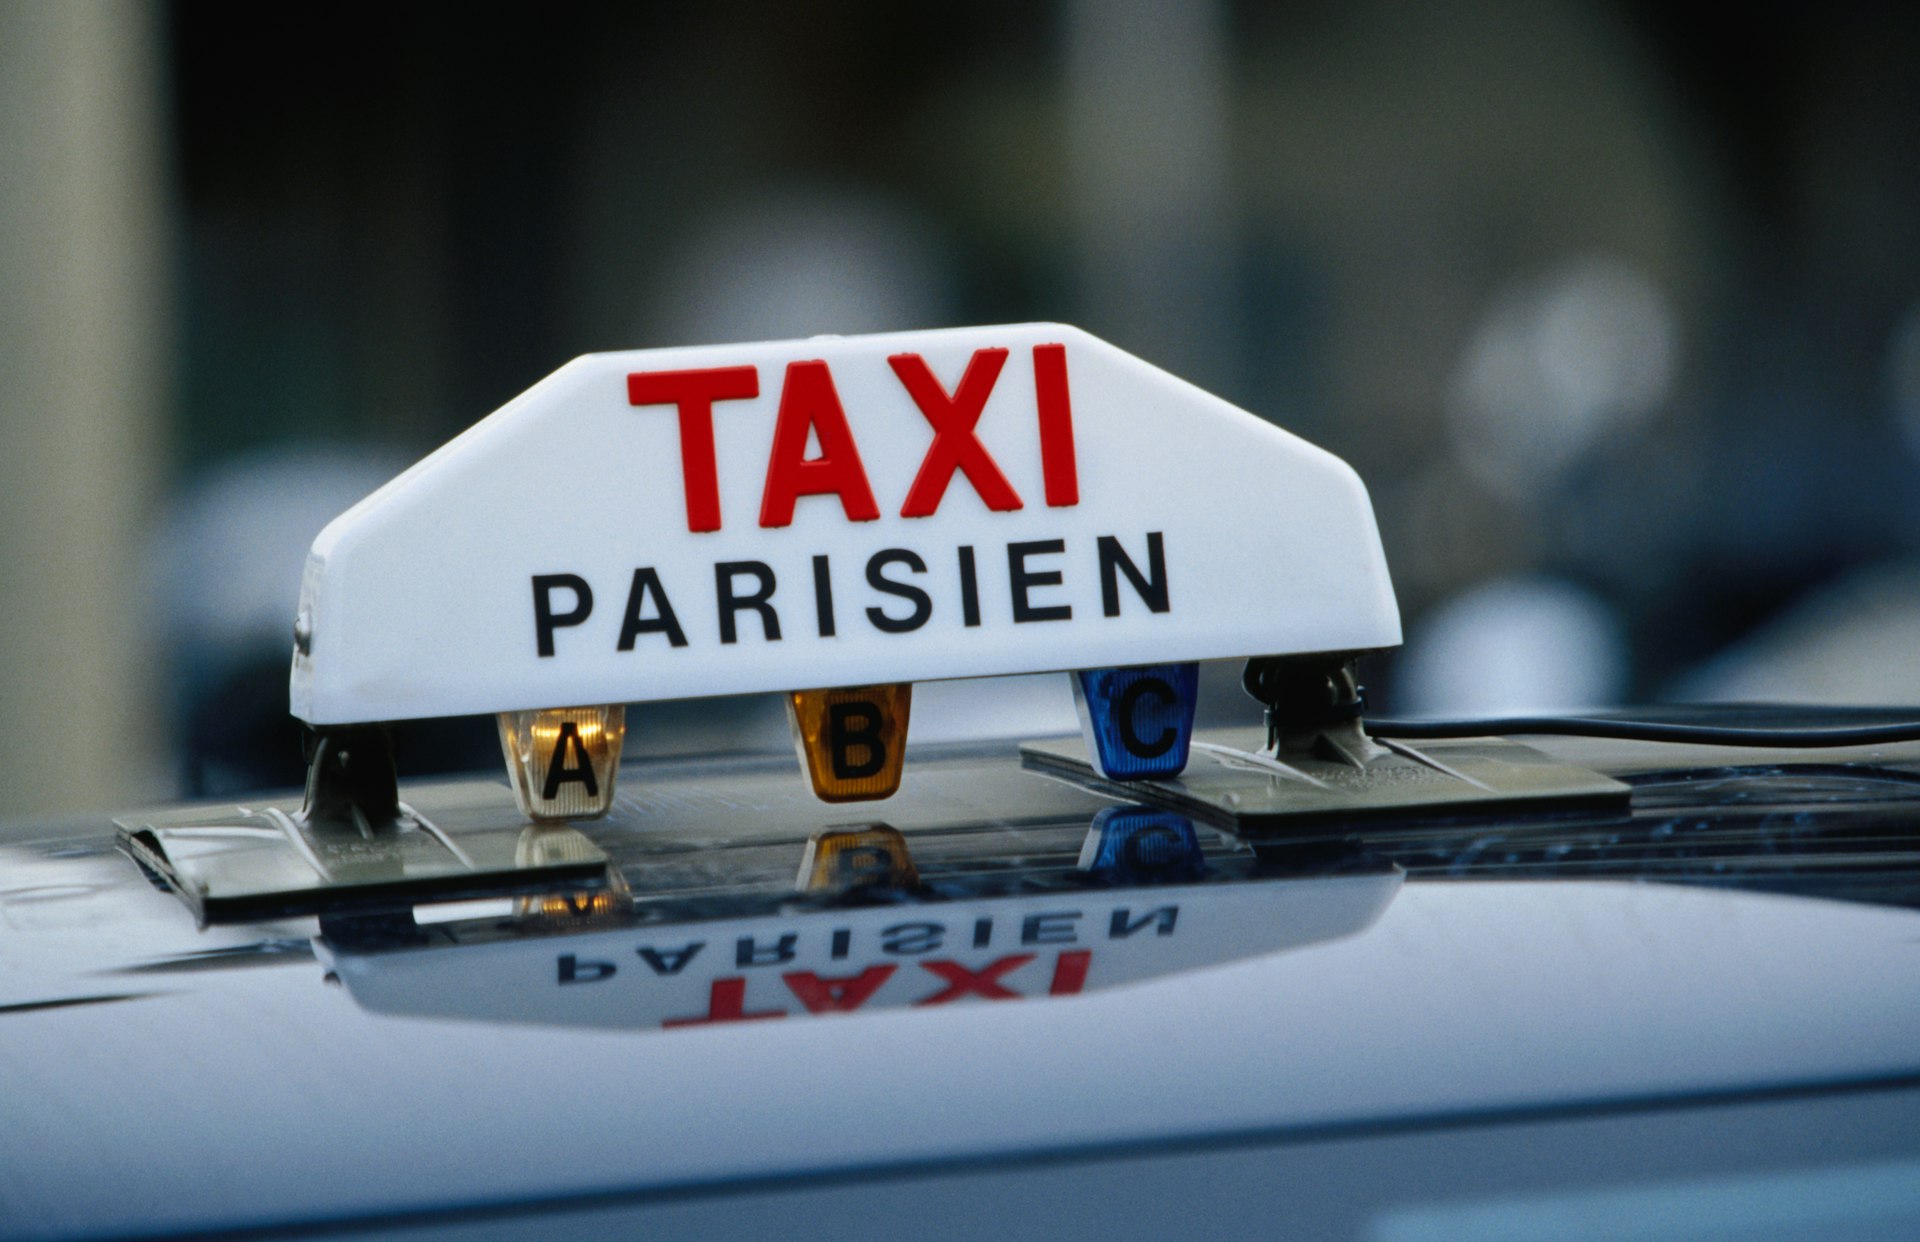 A red-and-white taxi sign on top of a vehicle